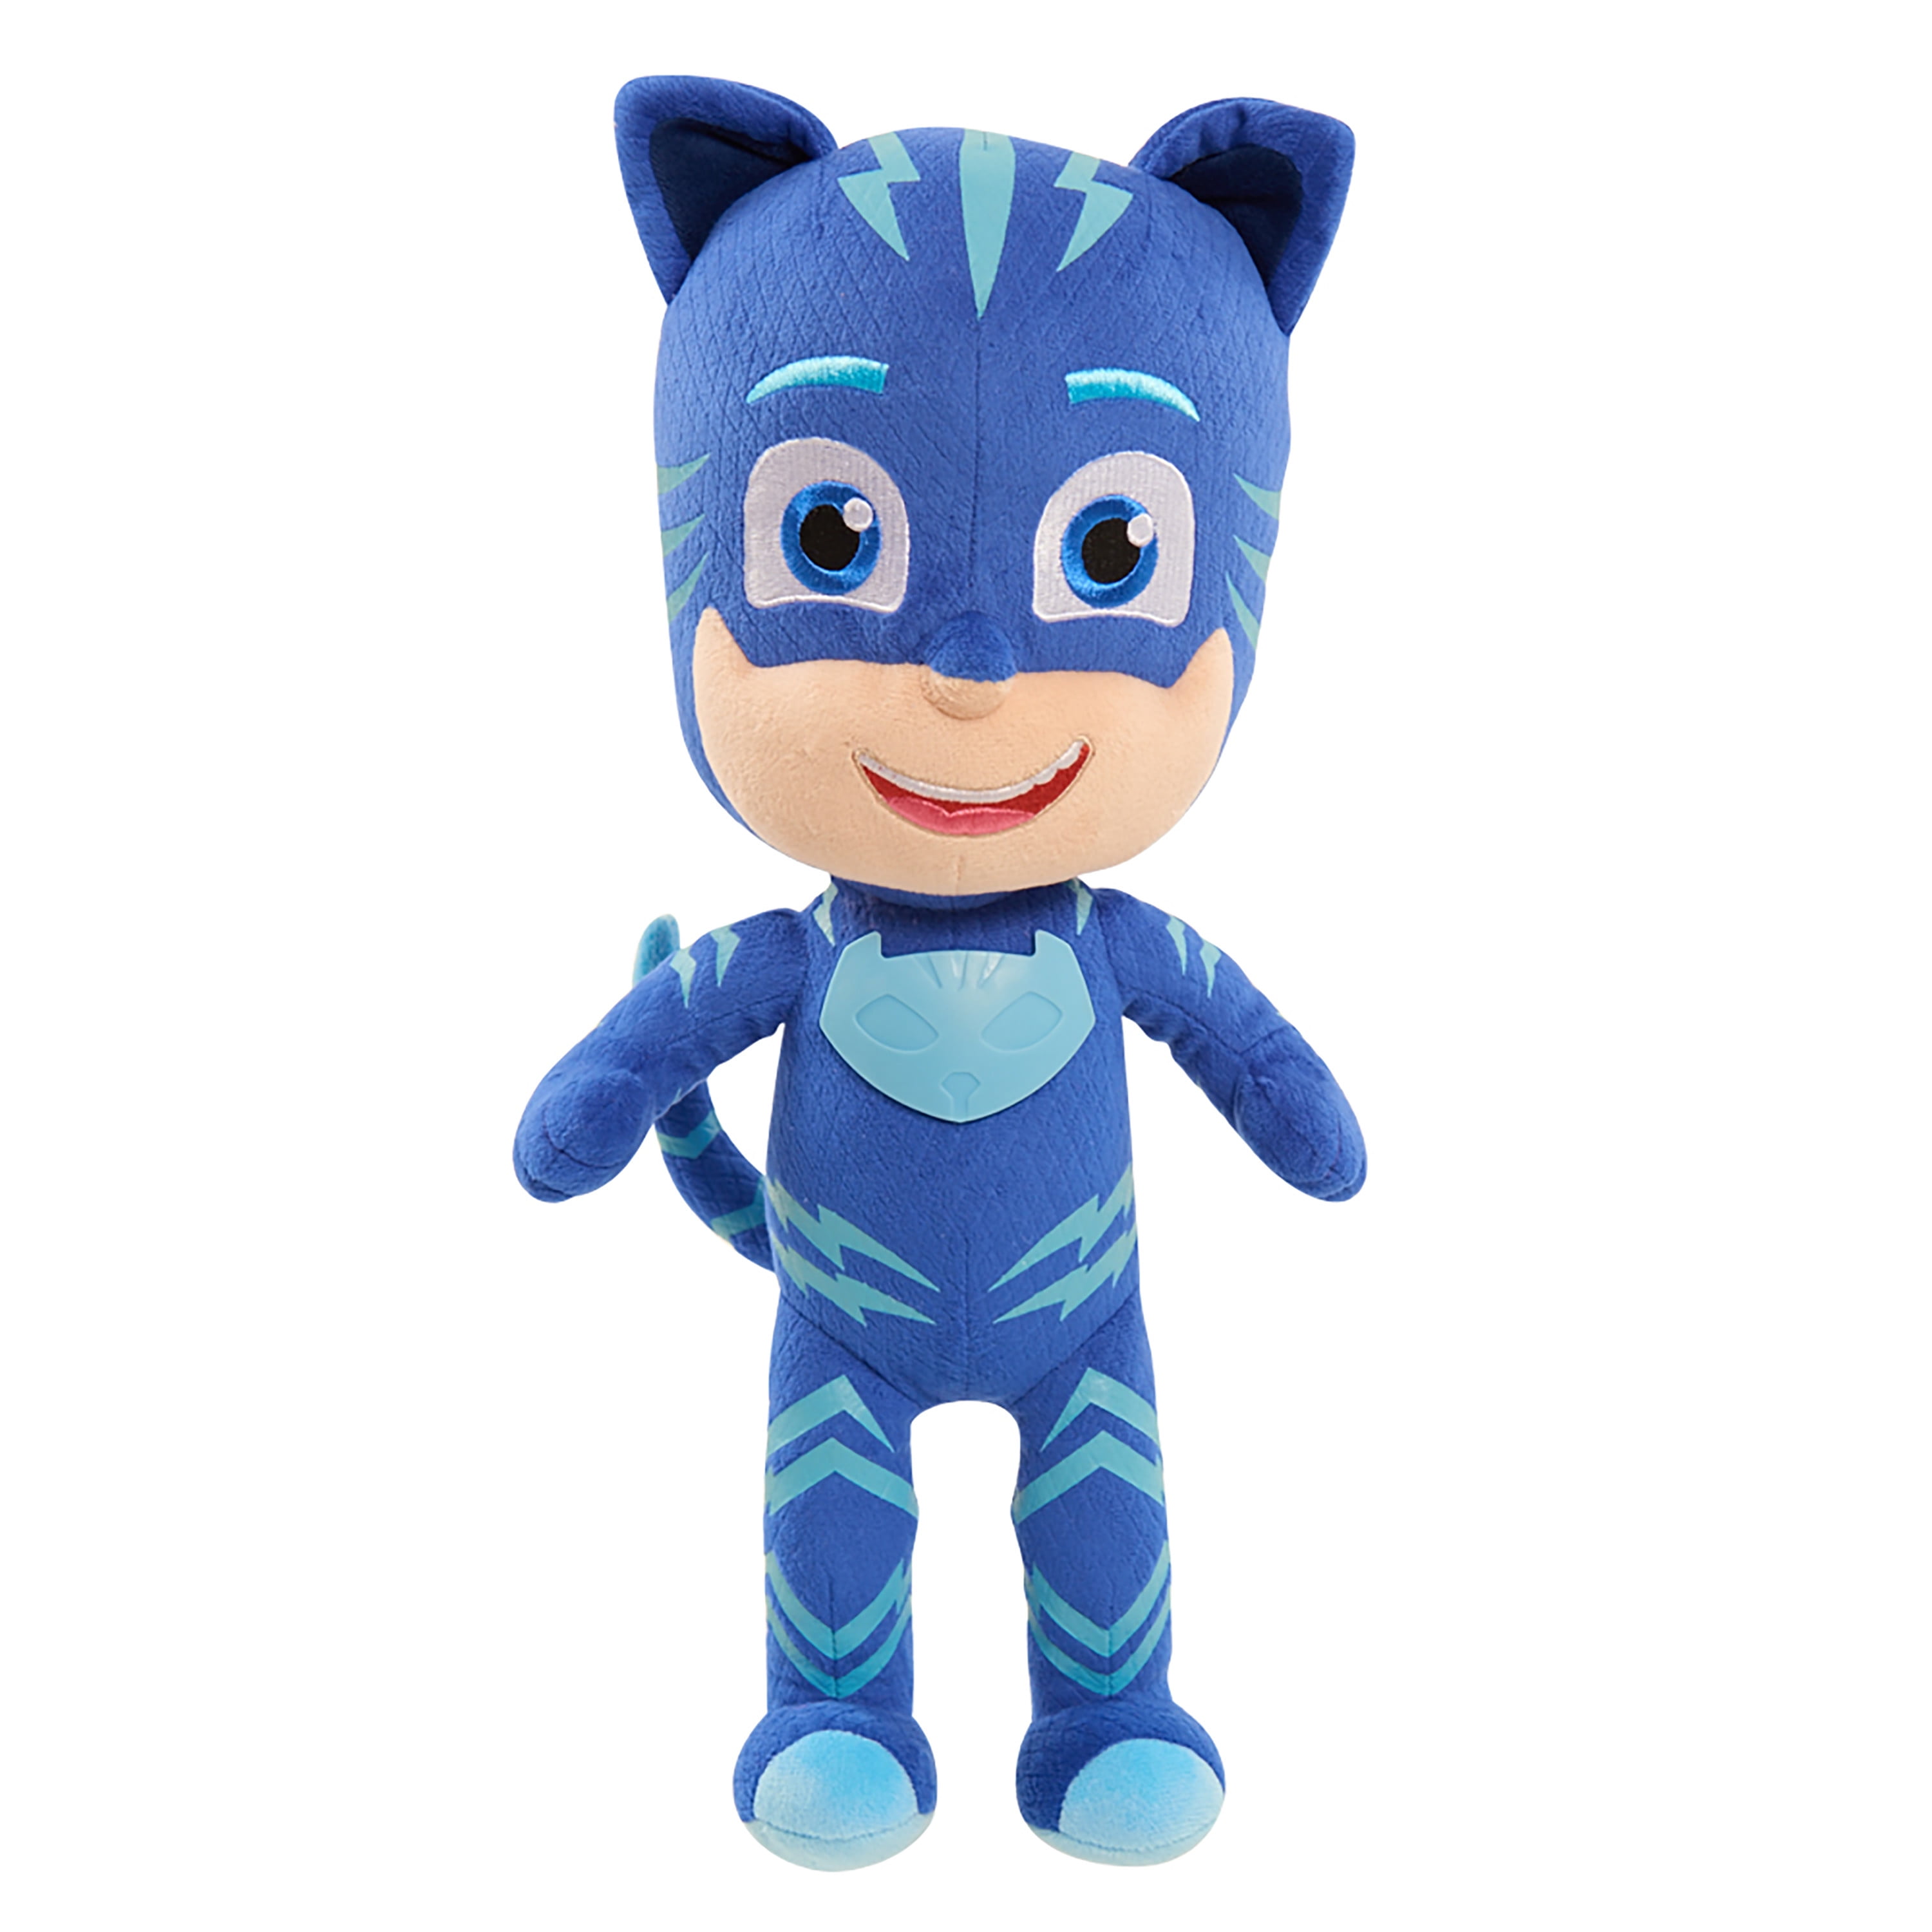 NEW OFFICIAL 14" PJ MASK SUPER HEROES PLUSH SOFT TOY 